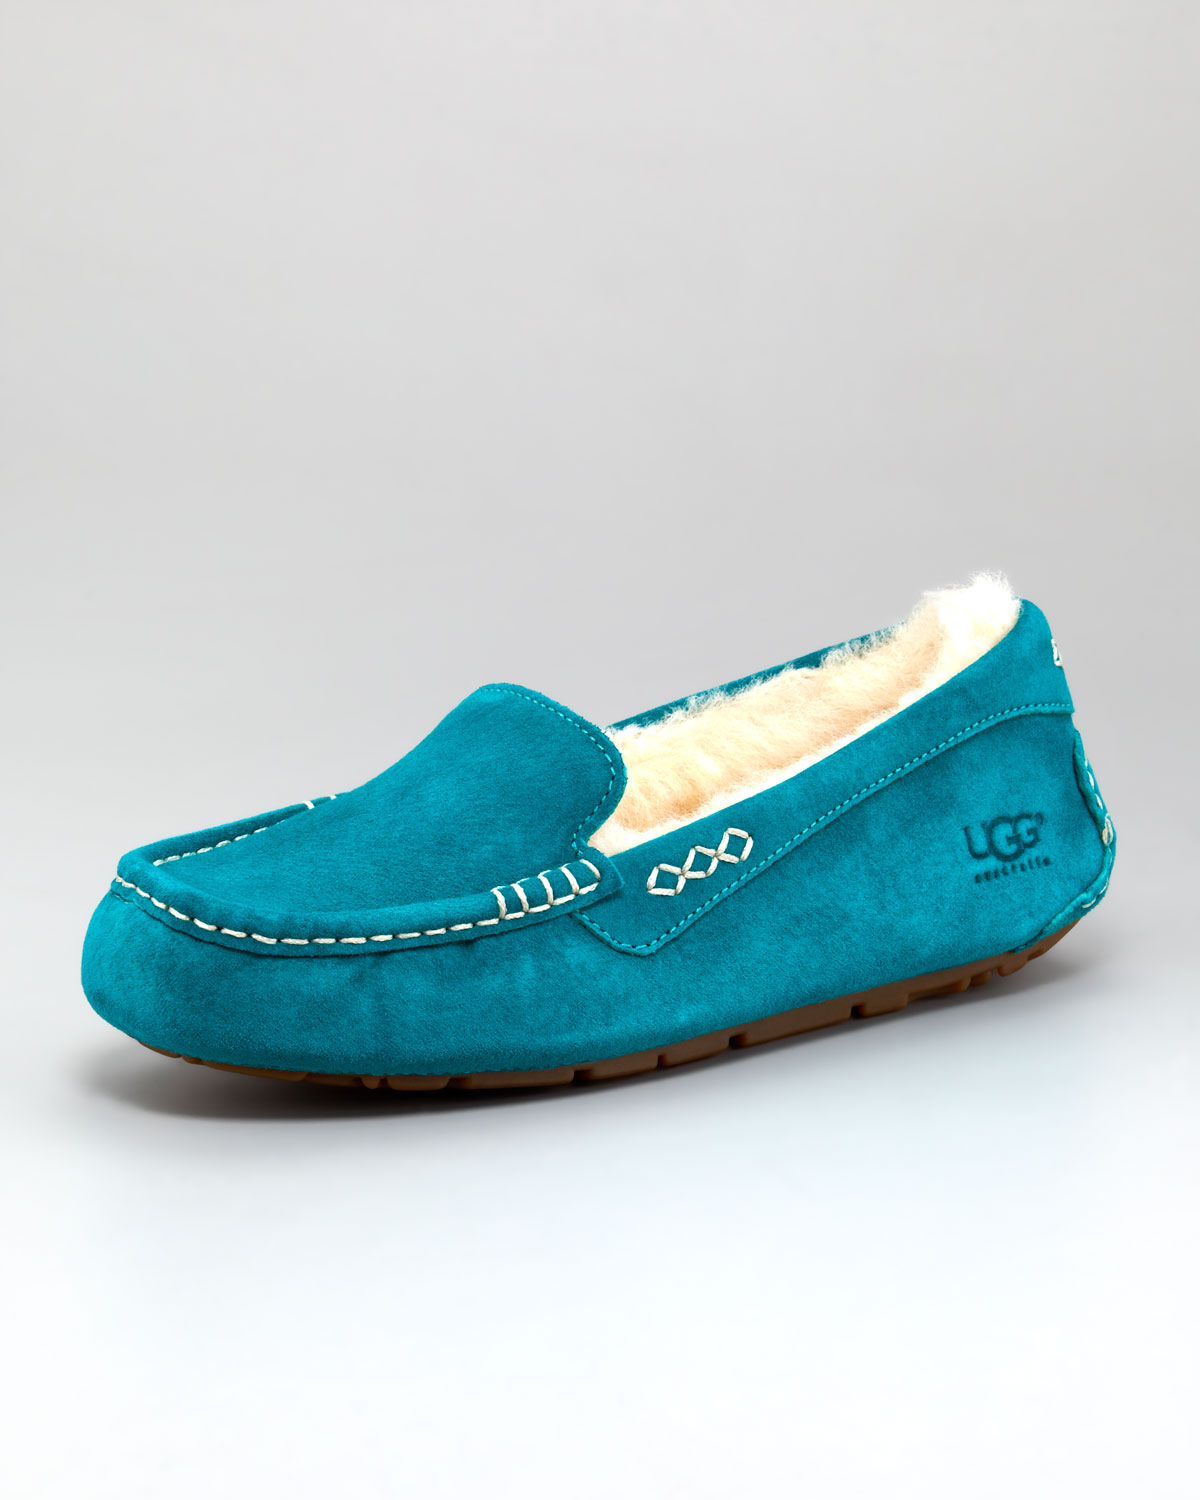 Ugg Ansley Shearling Moccasin Slipper in Blue (emerald) | Lyst